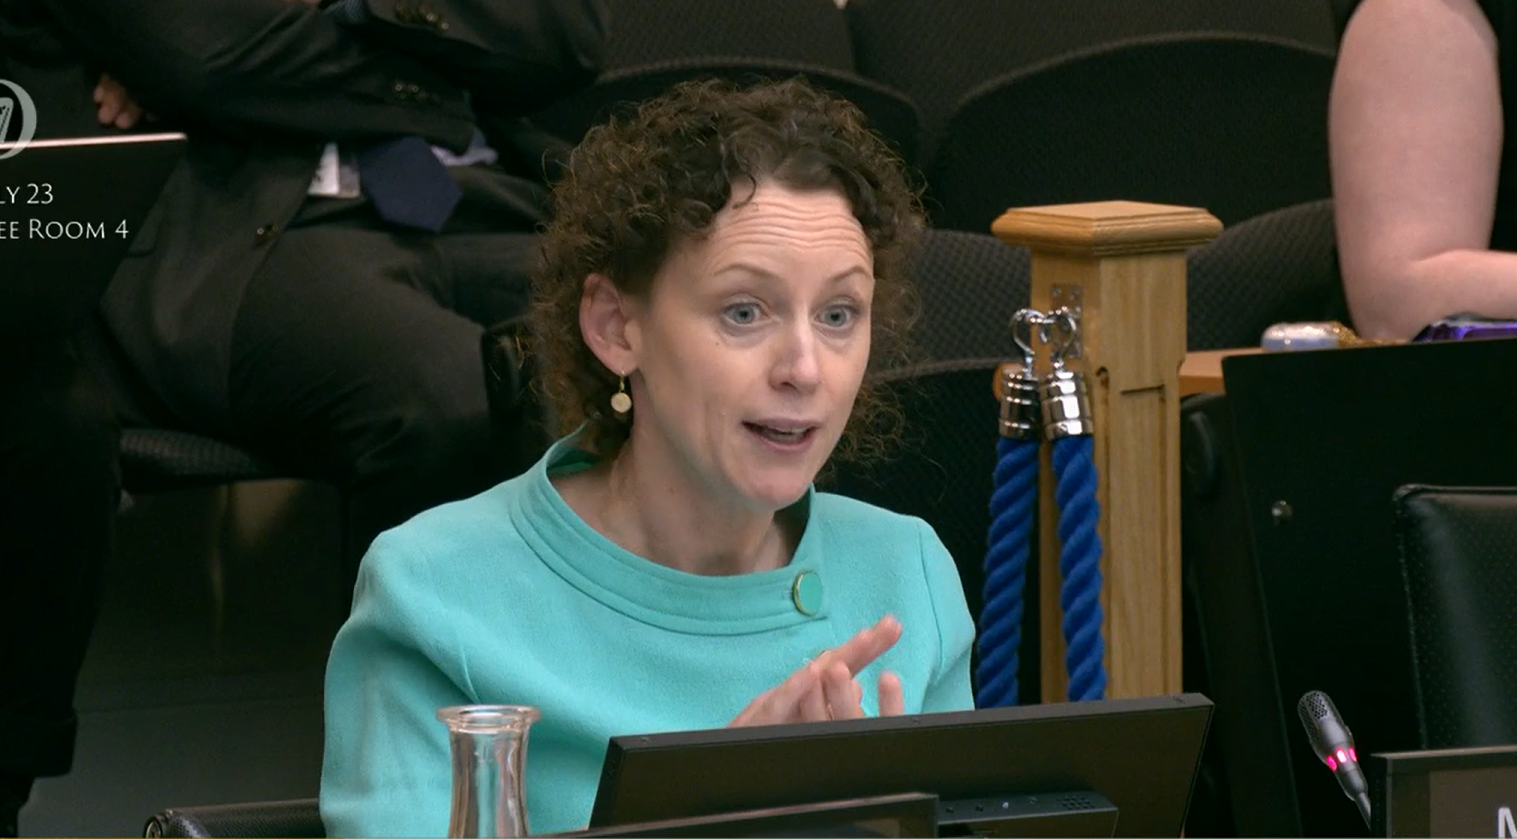 Senator Marie Sherlock at the Oireachtas Sports committee yesterday (Photo by Oireachtas T